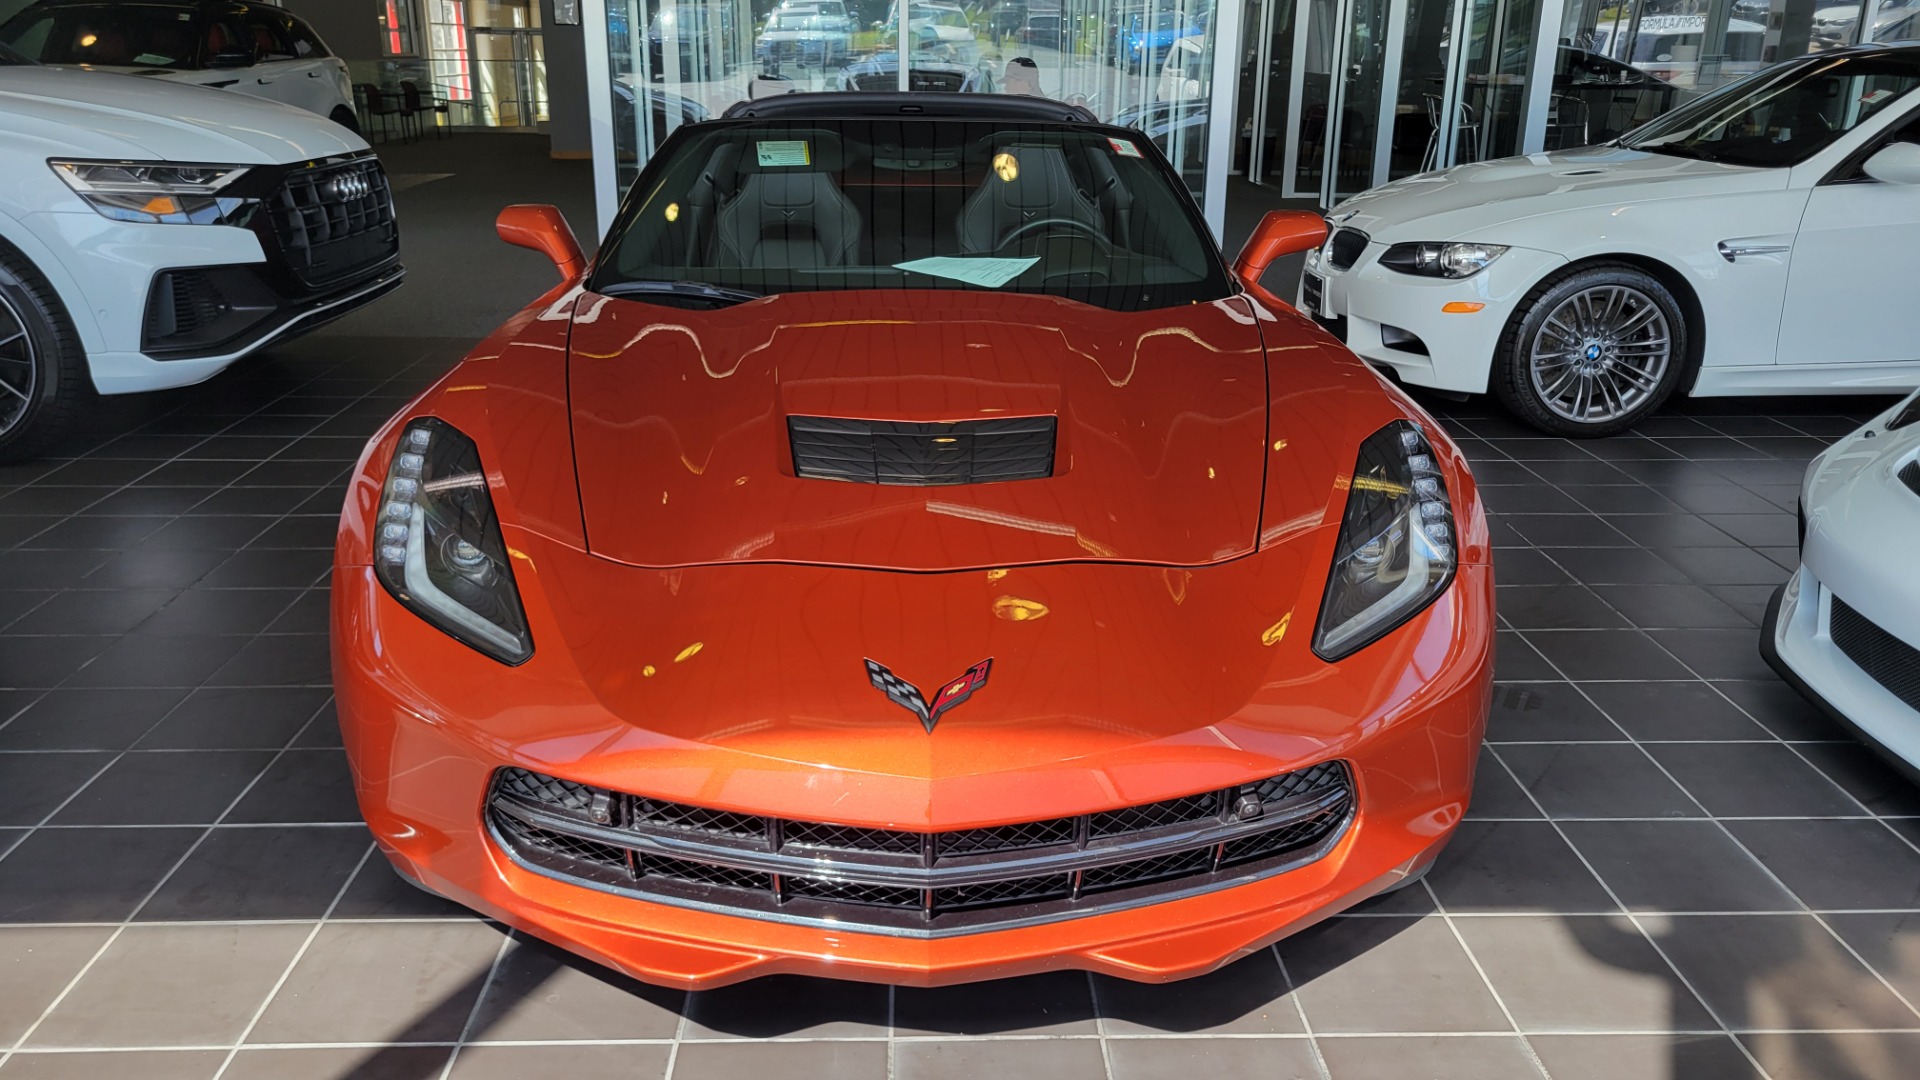 Used 2016 Chevrolet CORVETTE C7 COUPE / Z51 / 2LT / NAV / AUTO / PERF DATA & VIDEO RECORD for sale $56,495 at Formula Imports in Charlotte NC 28227 8